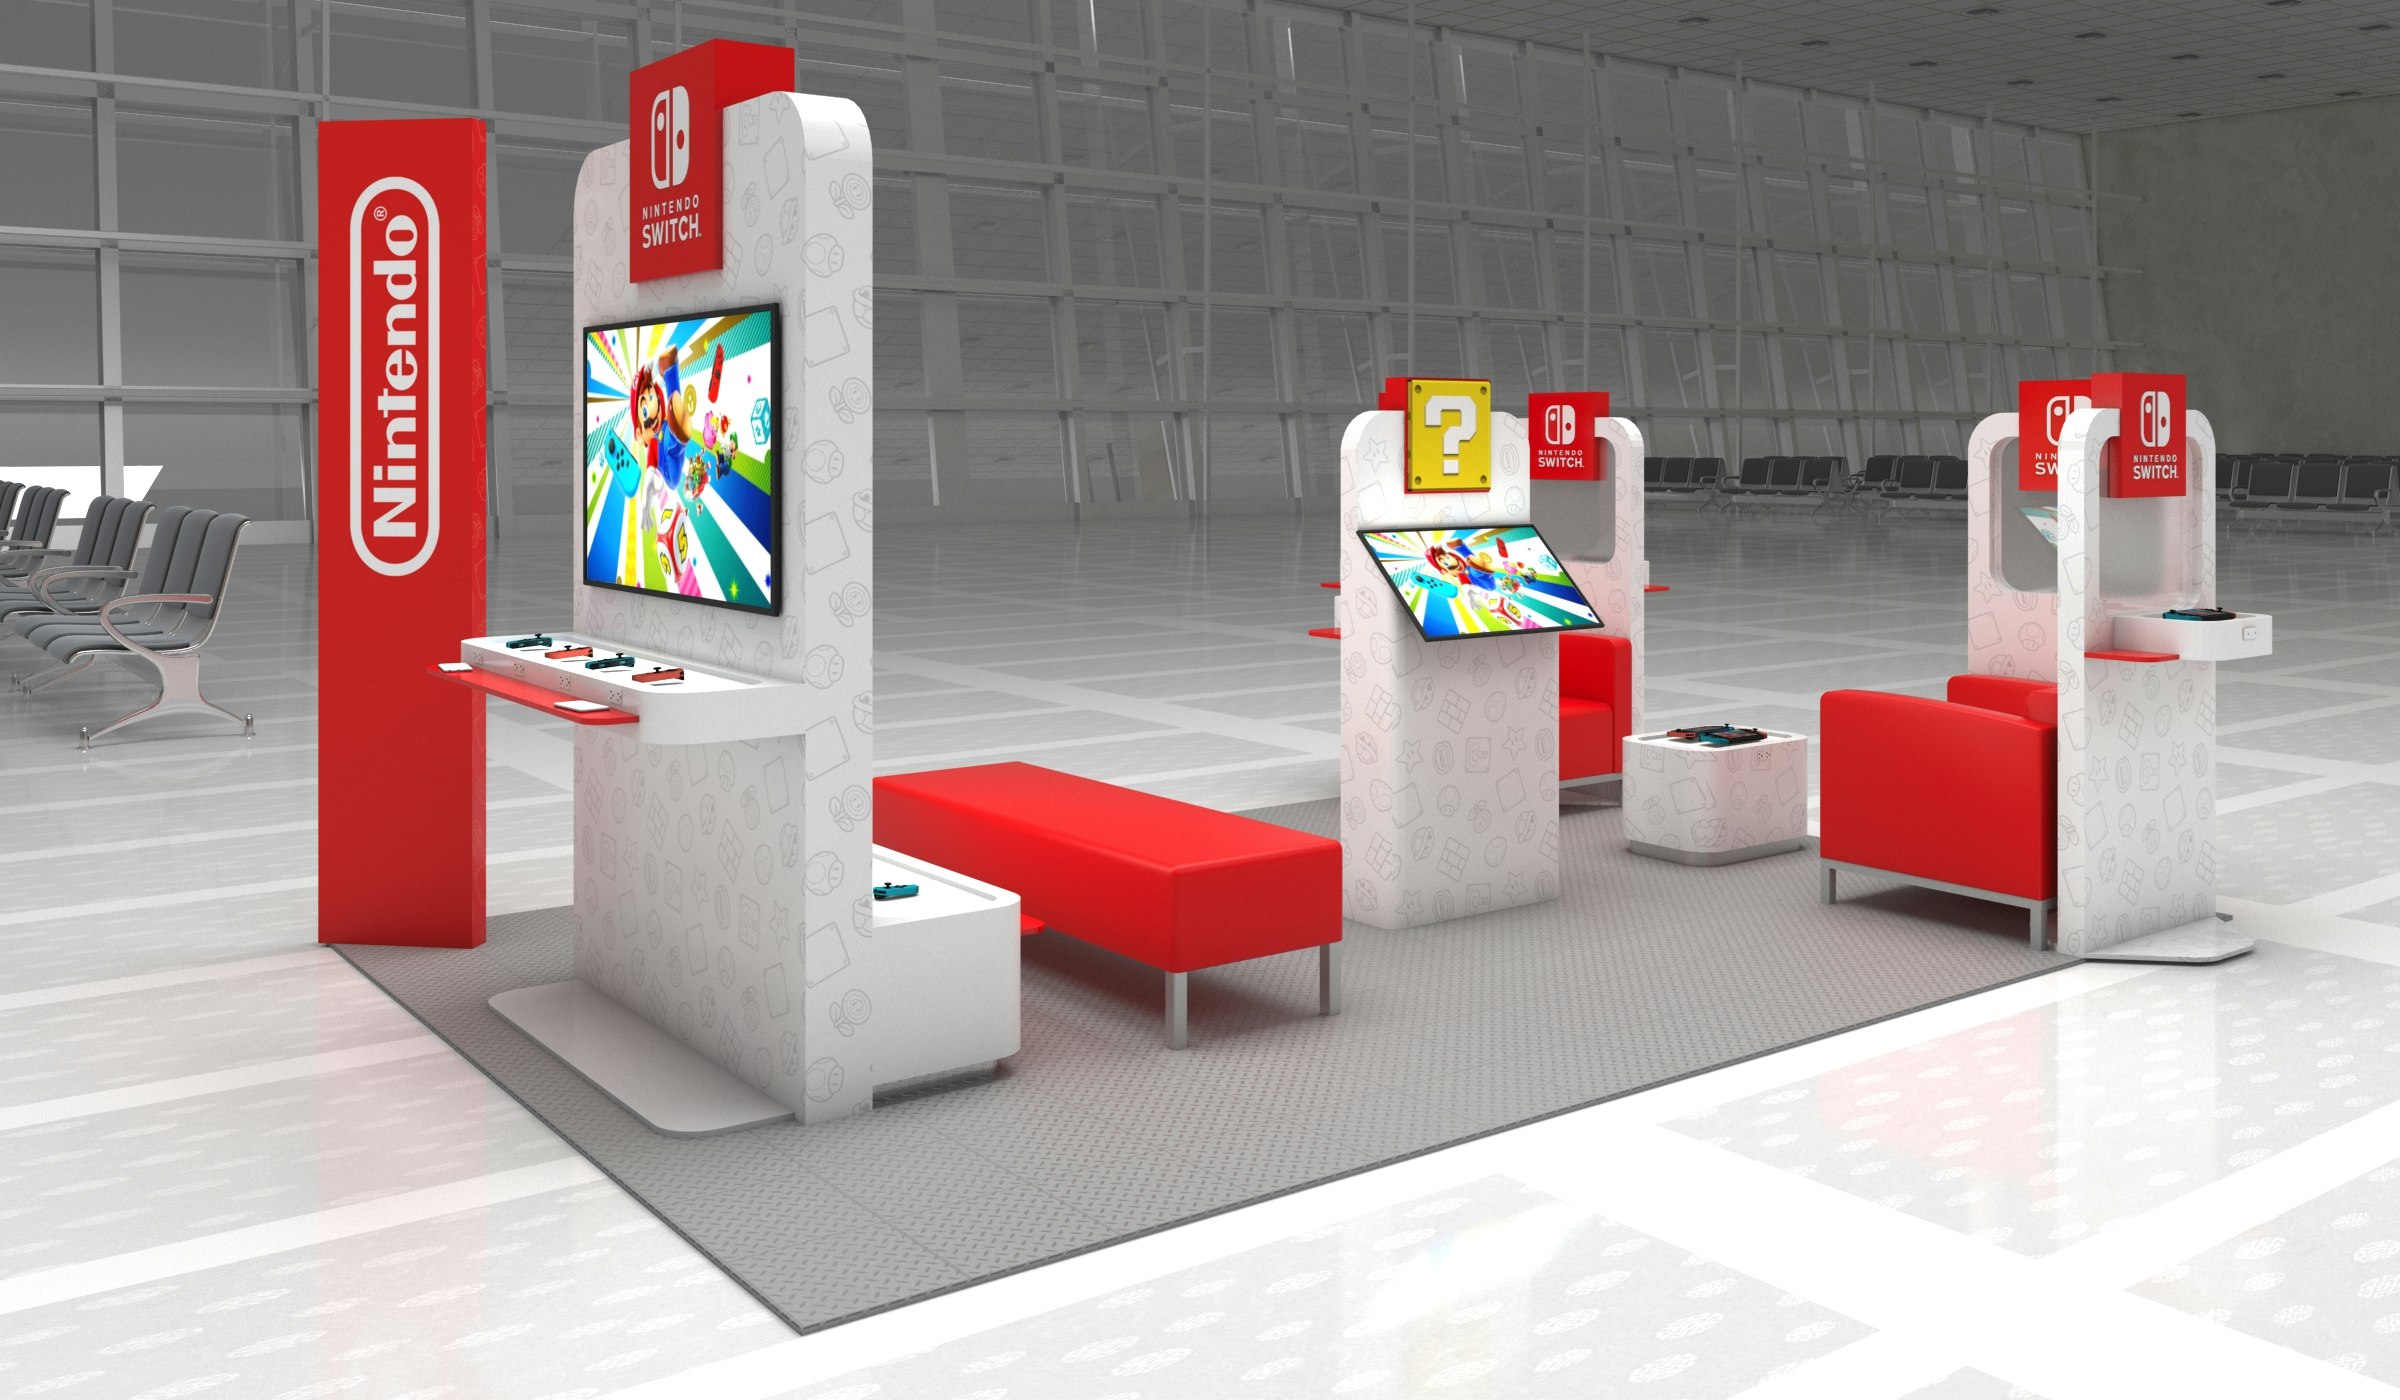 Nintendo's popup lounge at Dulles airport, featuring red chairs and Switches available to play